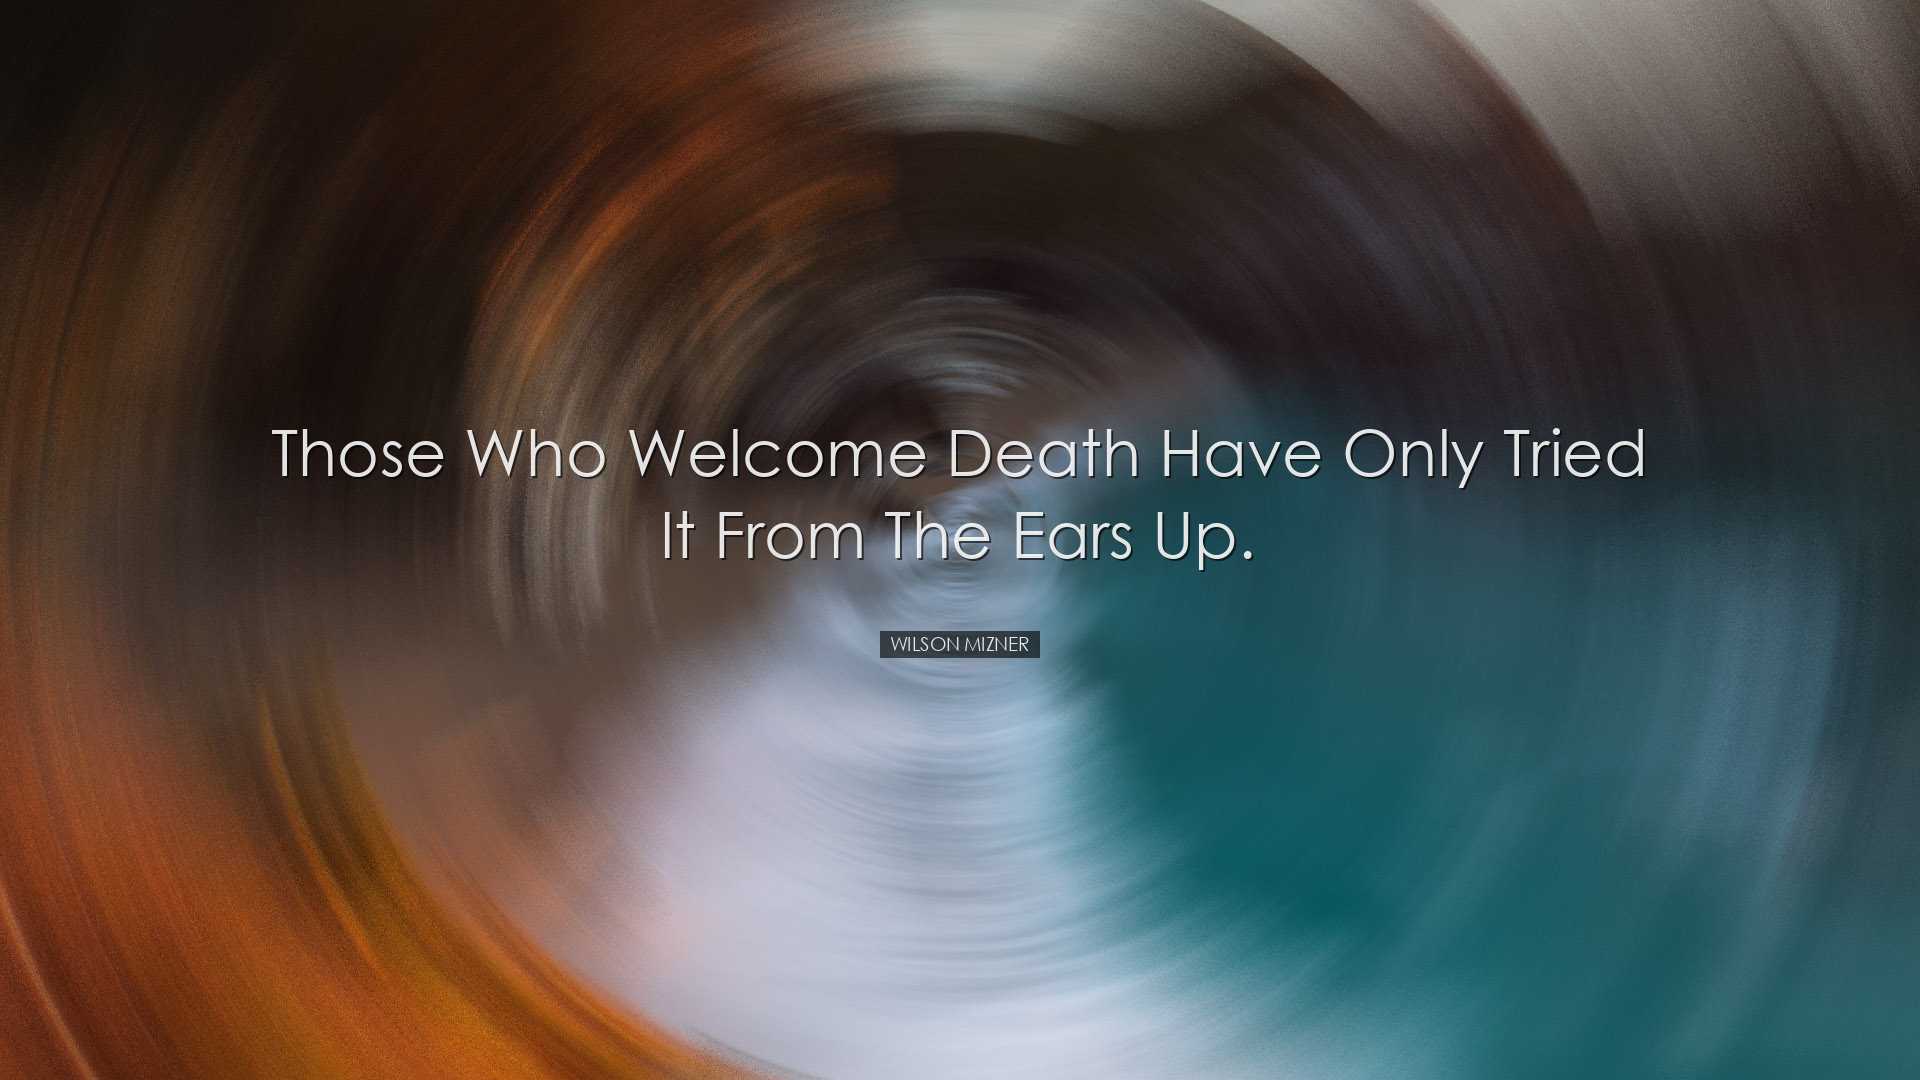 Those who welcome death have only tried it from the ears up. - Wil